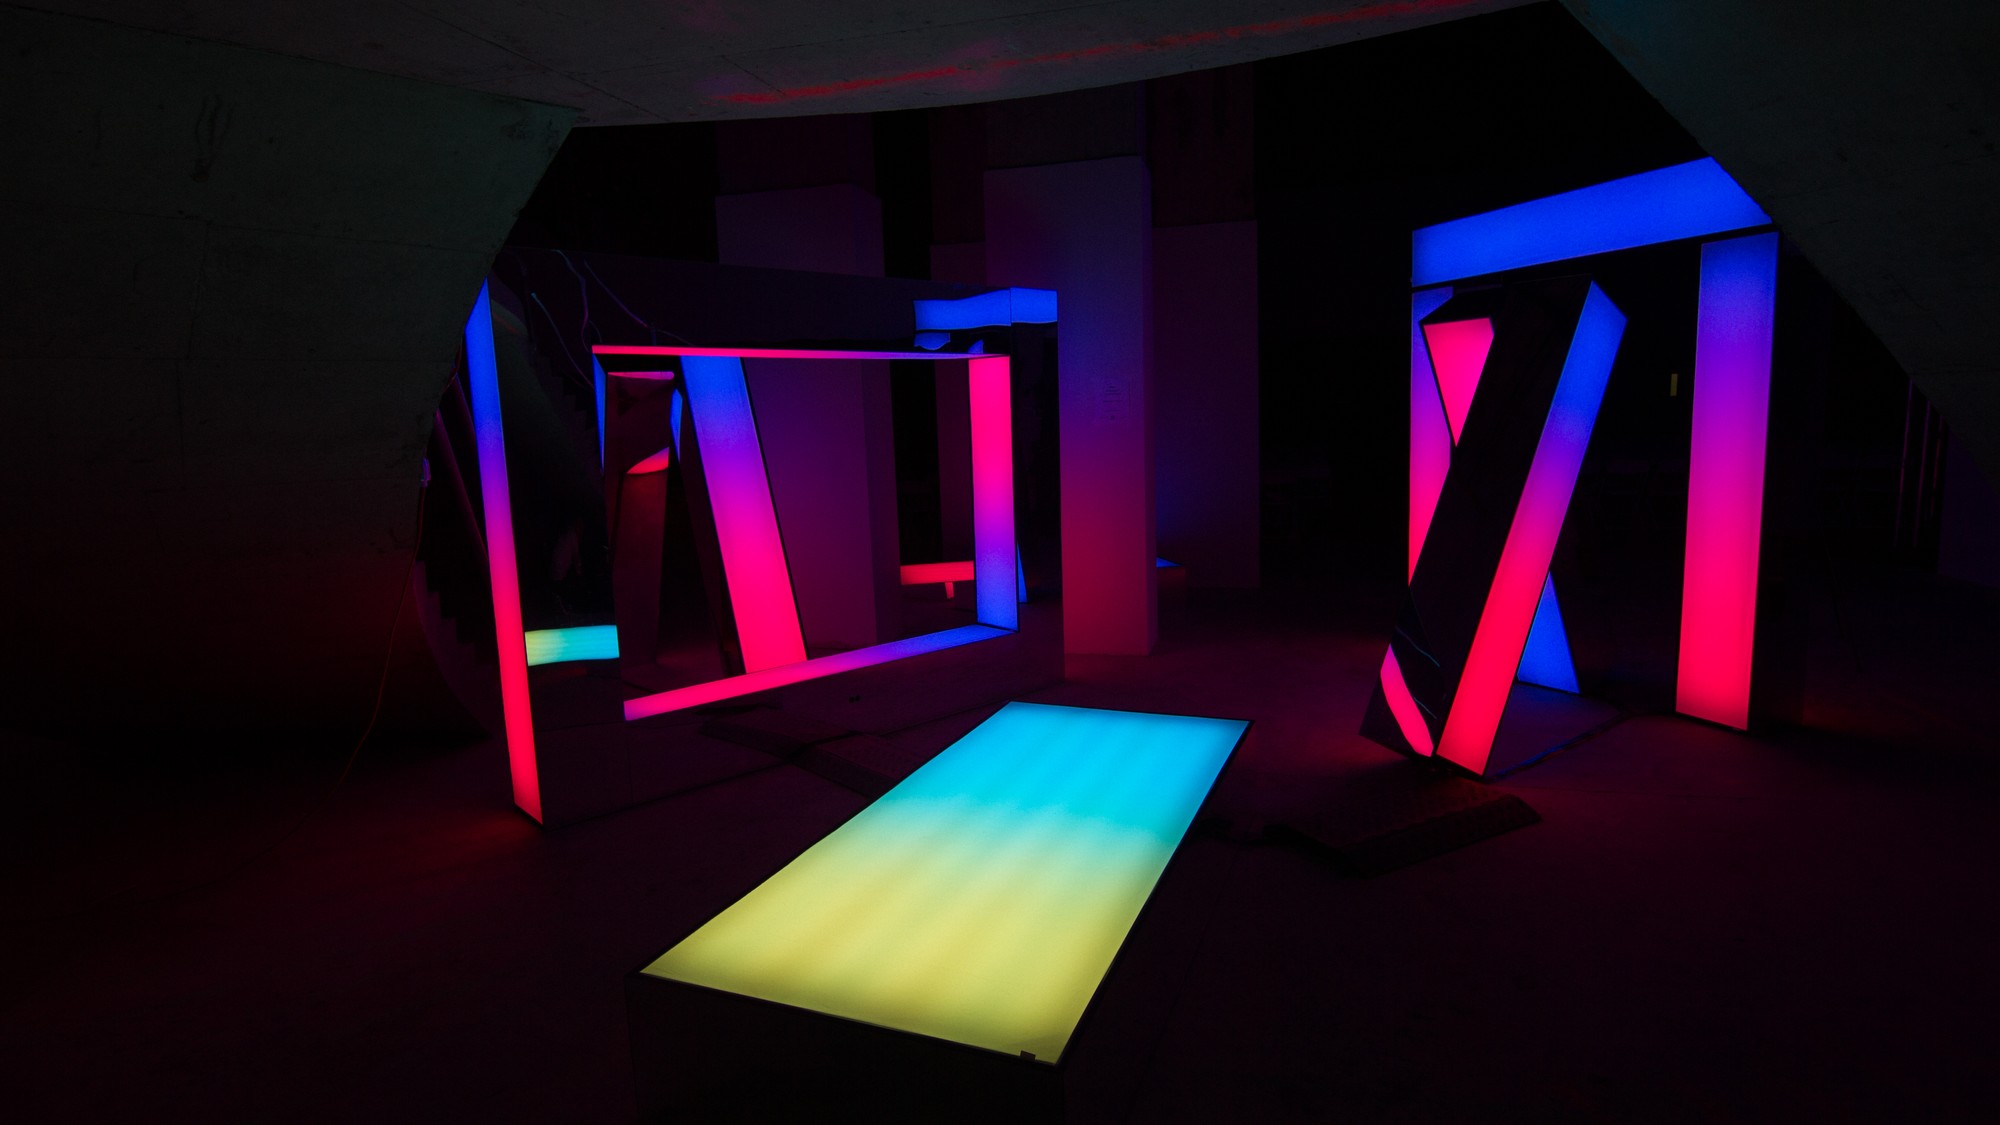 This Neon Light Installation Is Like An Interactive